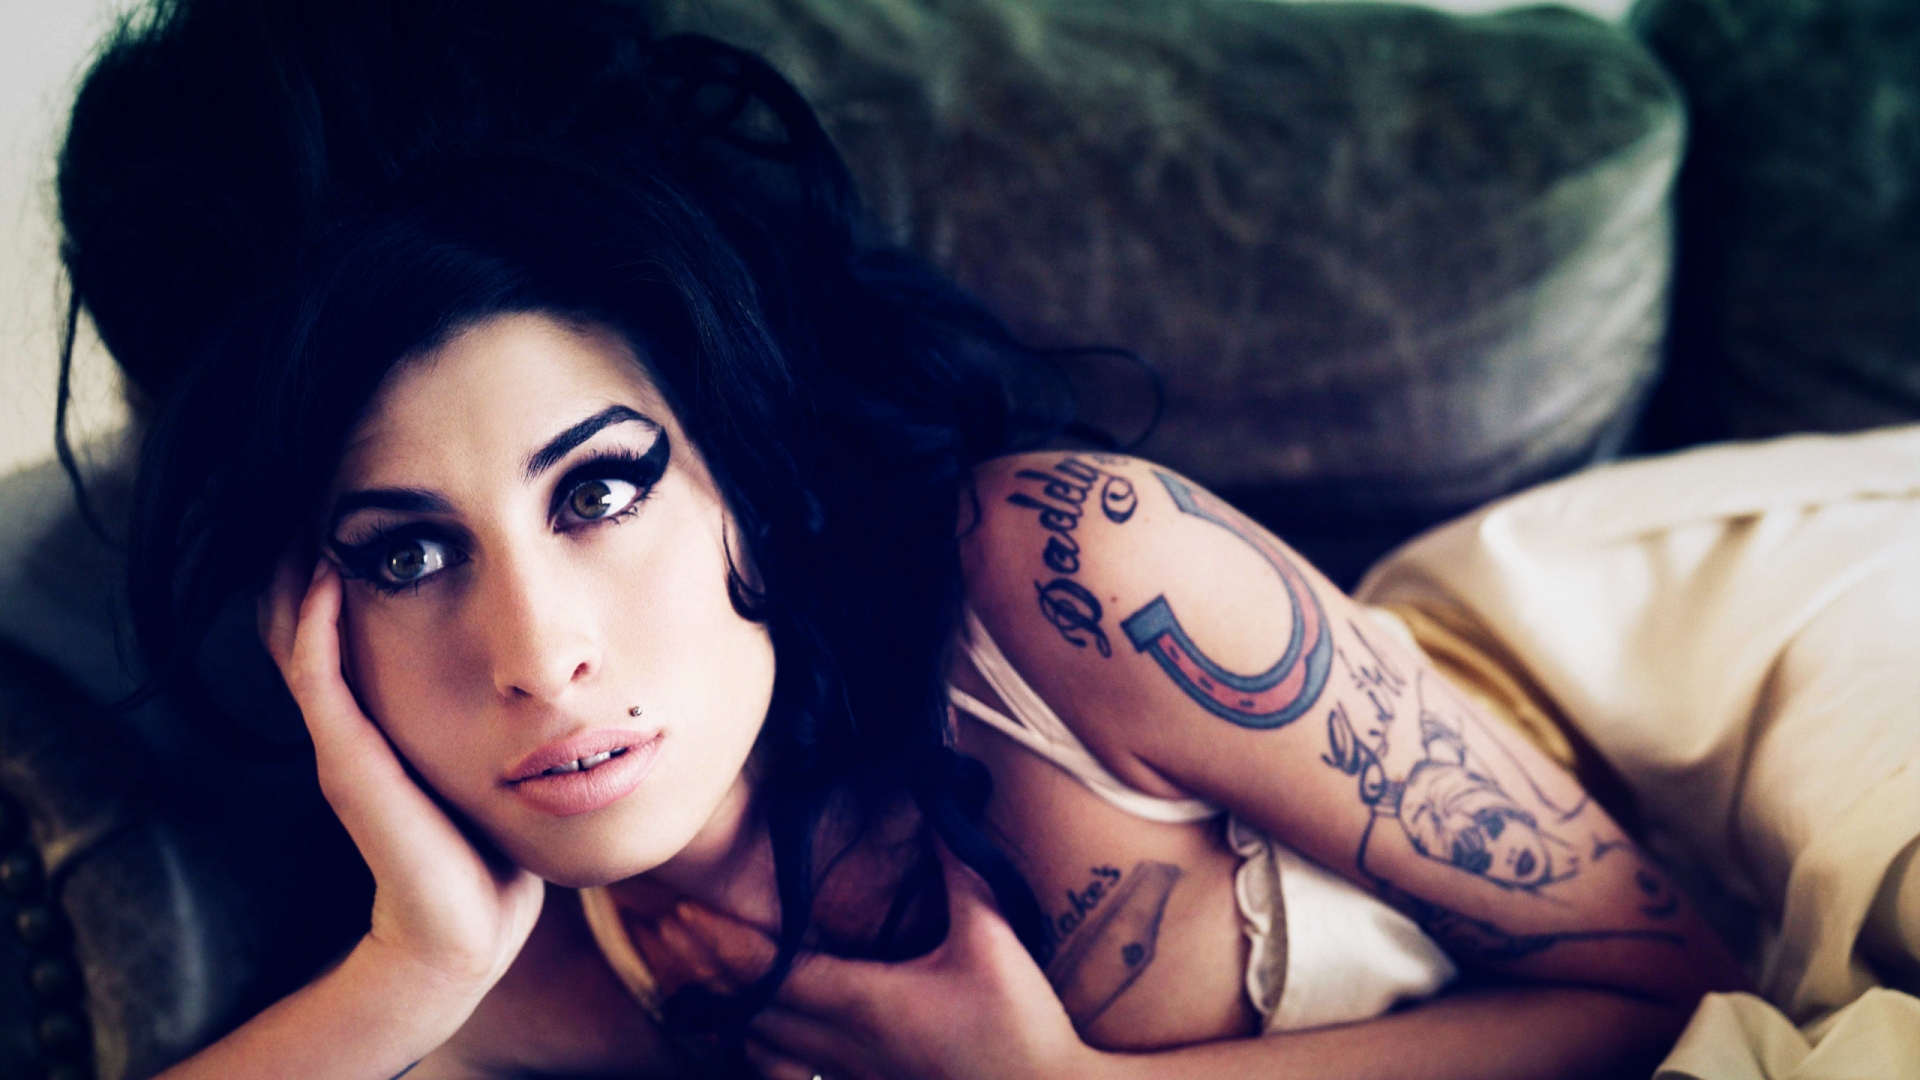 Amy Winehouse for 1920 x 1080 HDTV 1080p resolution